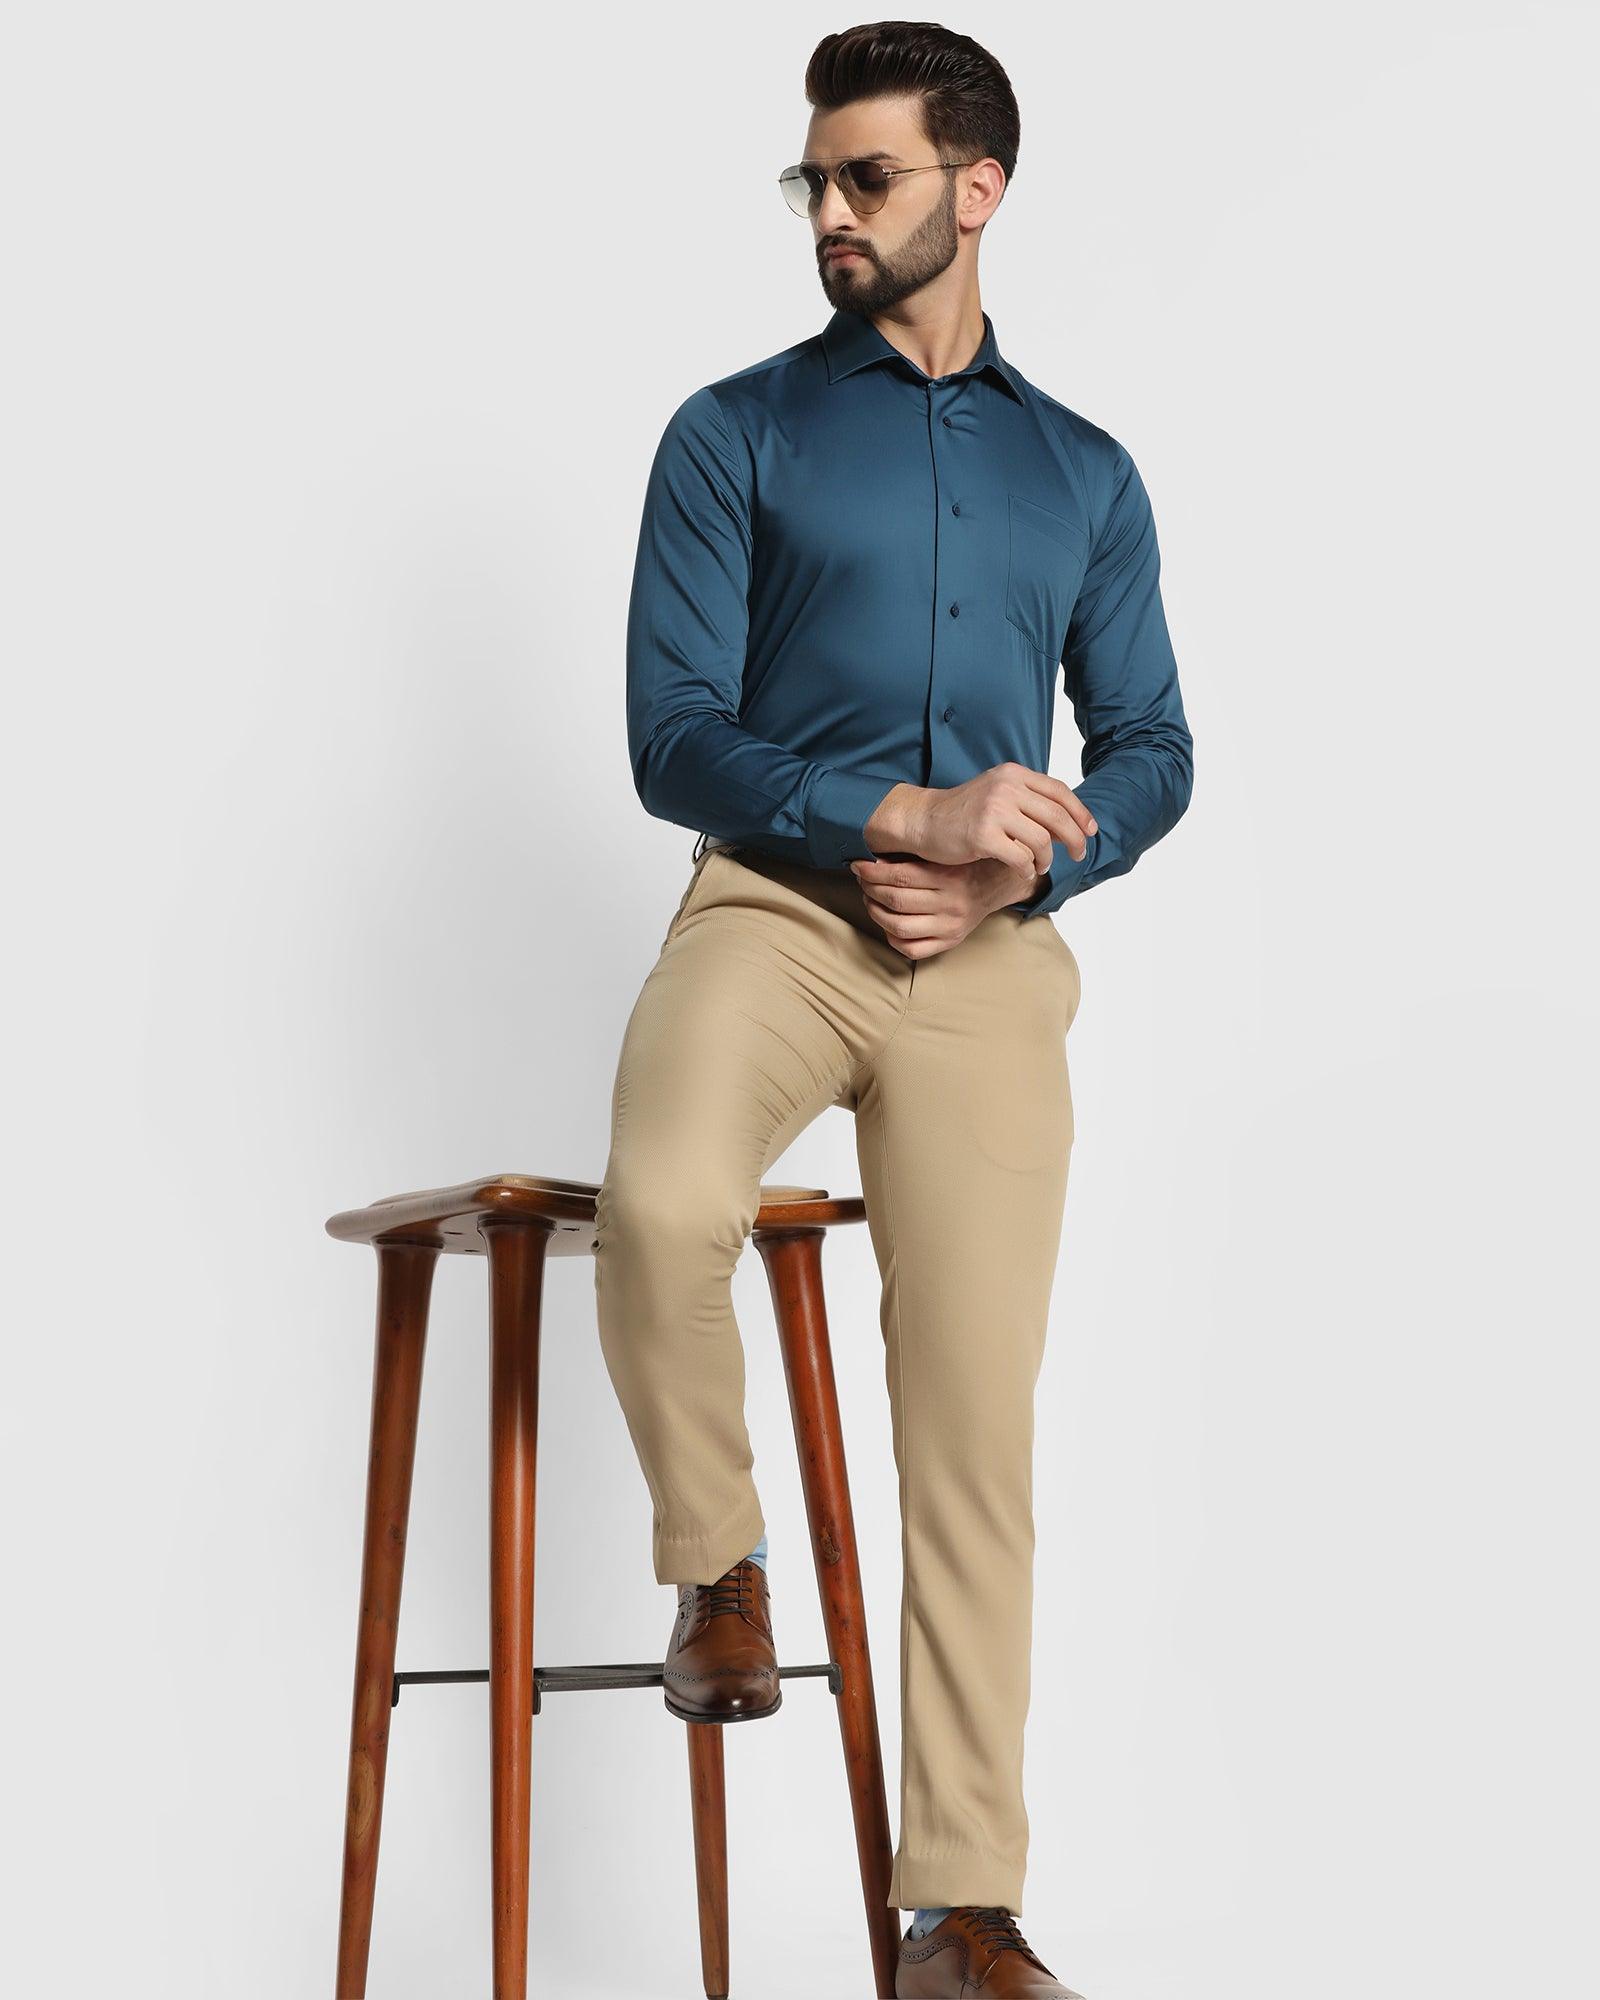 What color pants will match a navy blue shirt  Quora